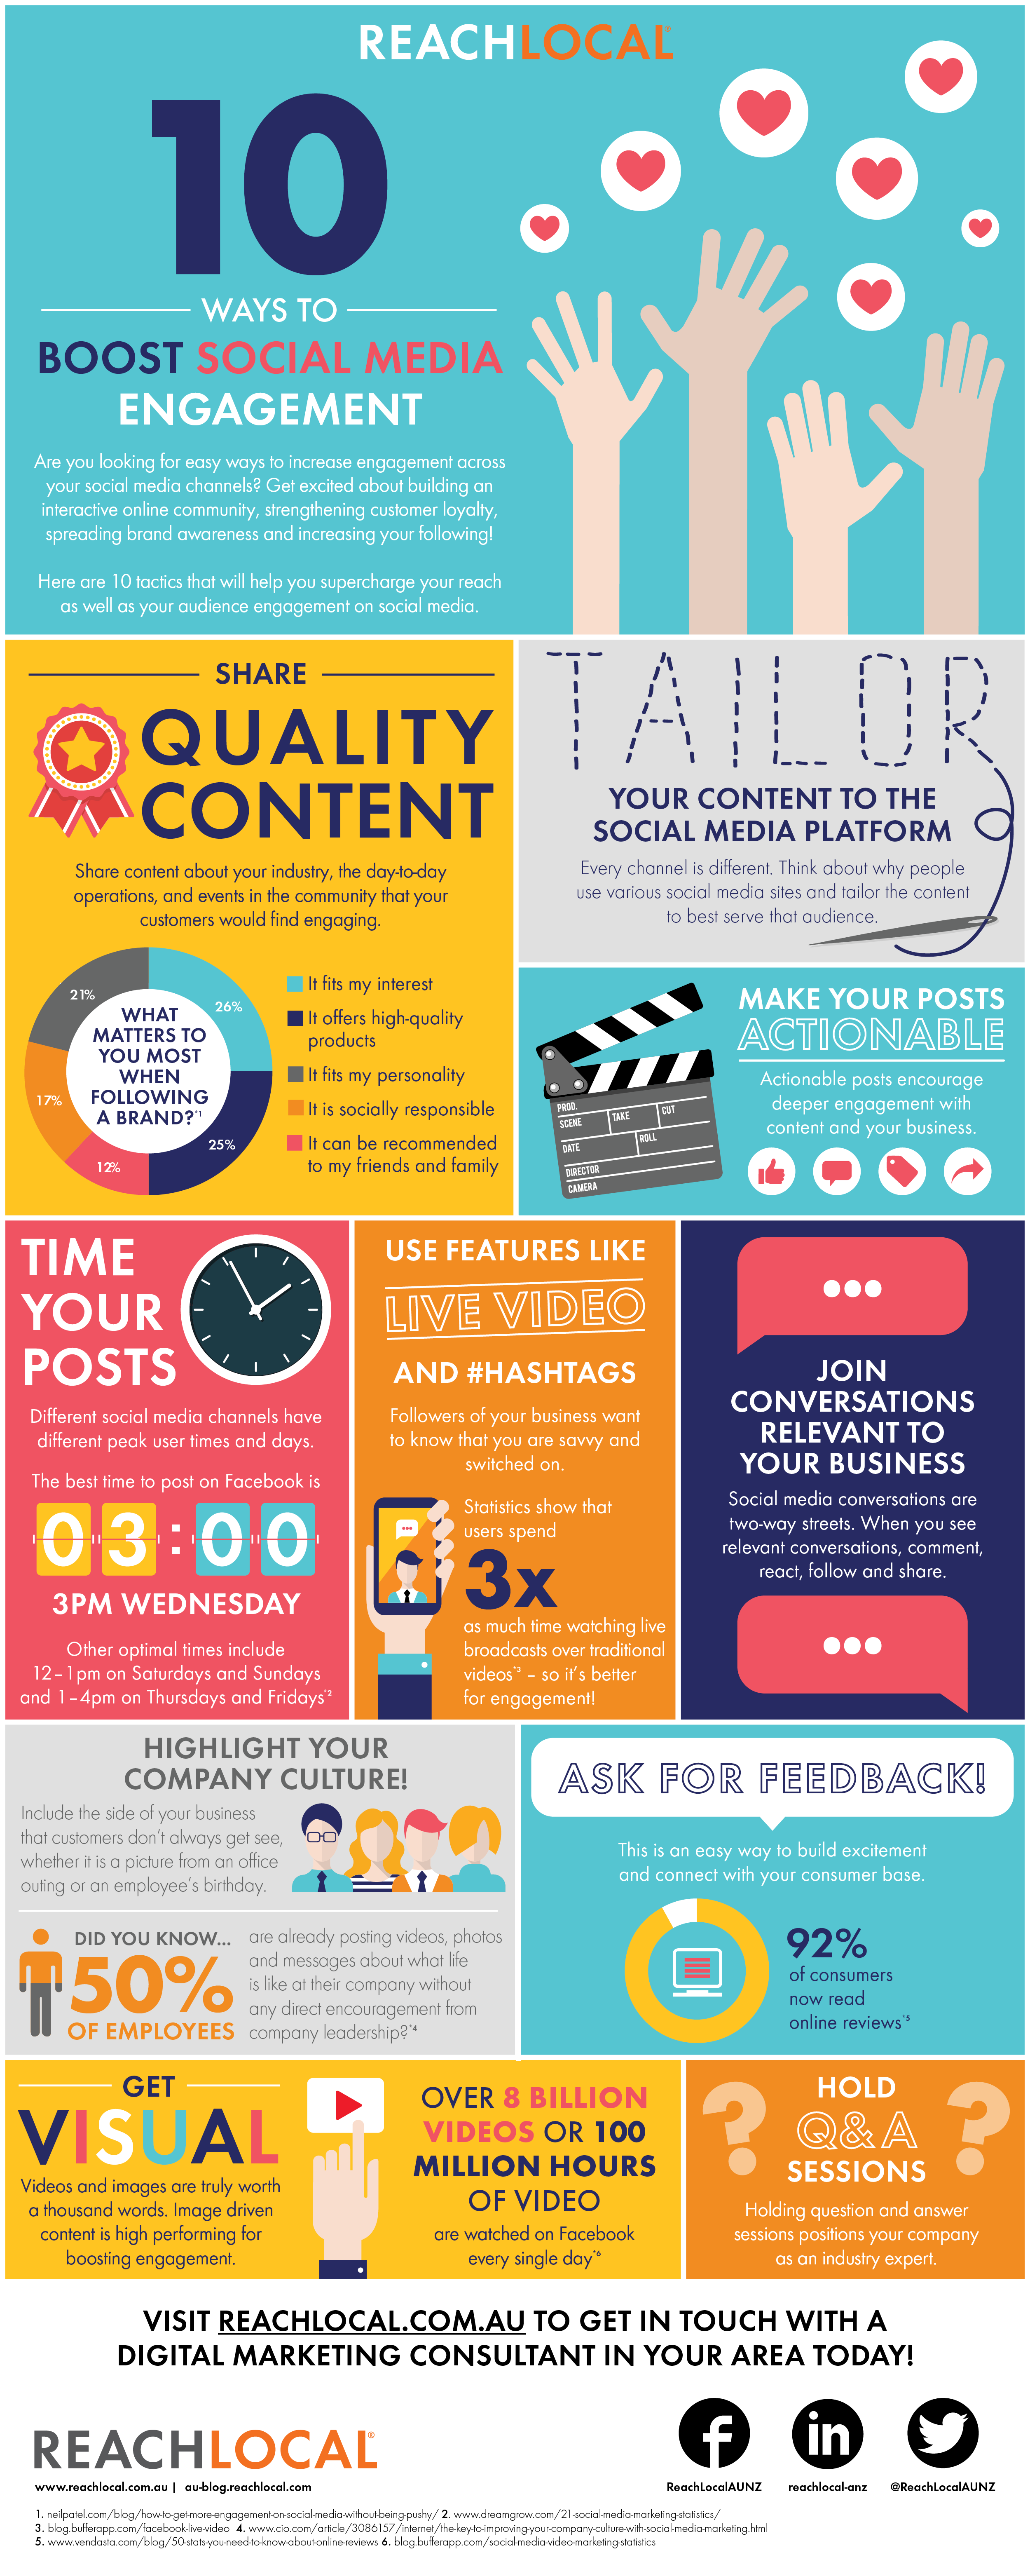 10 Ways to Boost Social Media Engagement